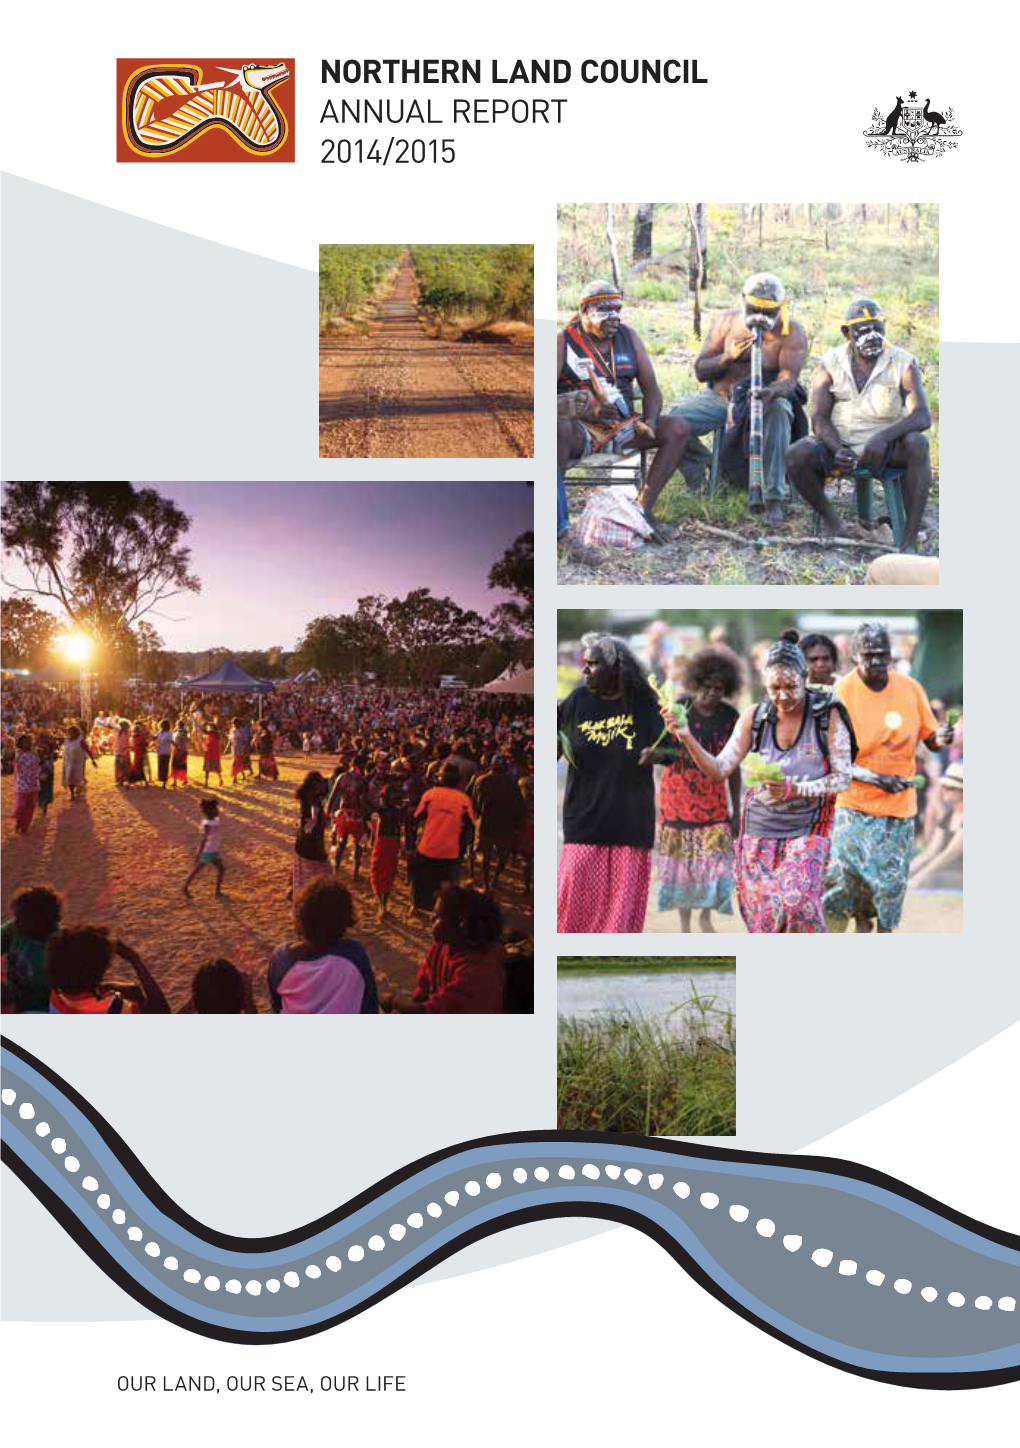 Northern Land Council Annual Report 2014/2015